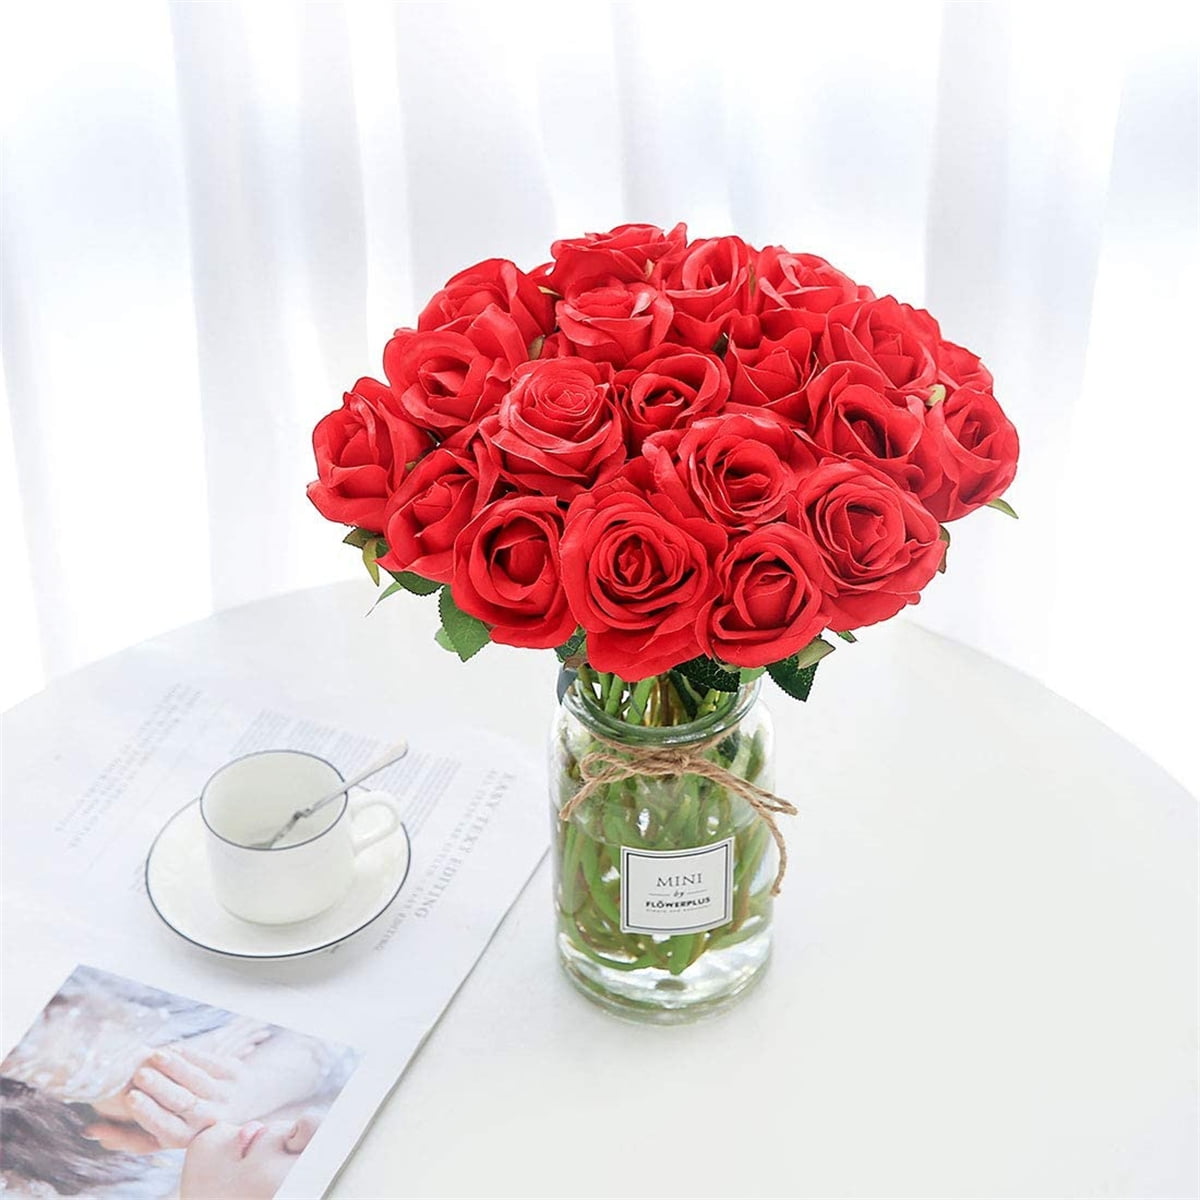 Casewin Real Touch Orange Roses Artificial Flower 10 s Silk Roses 'Petals  Feel and Look like Fresh Roses' Bouquet of Flowers Floral Arrangements 